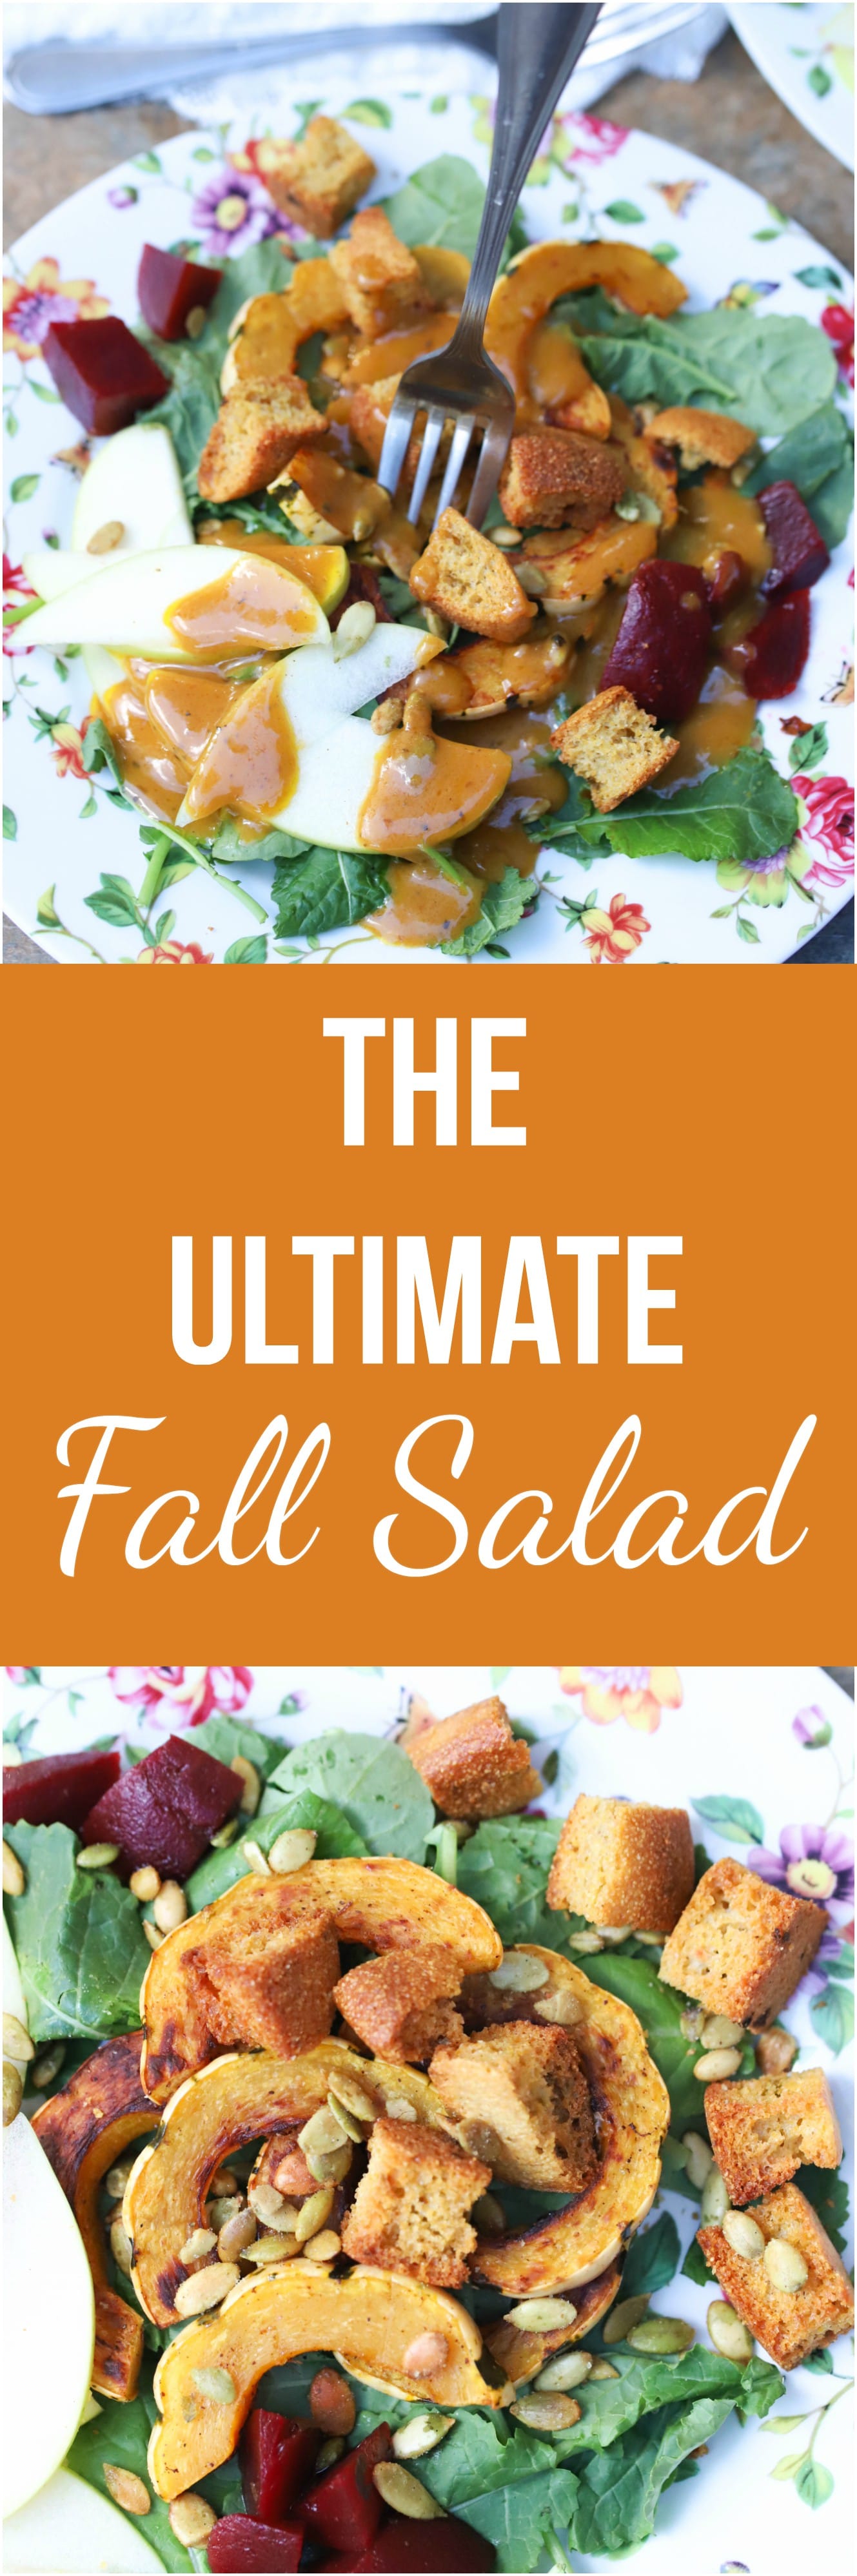 The Ultimate Fall Salad is a hearty, satisfying salad packed with autumn’s bounty. It is naturally vegan & gluten-free as well.